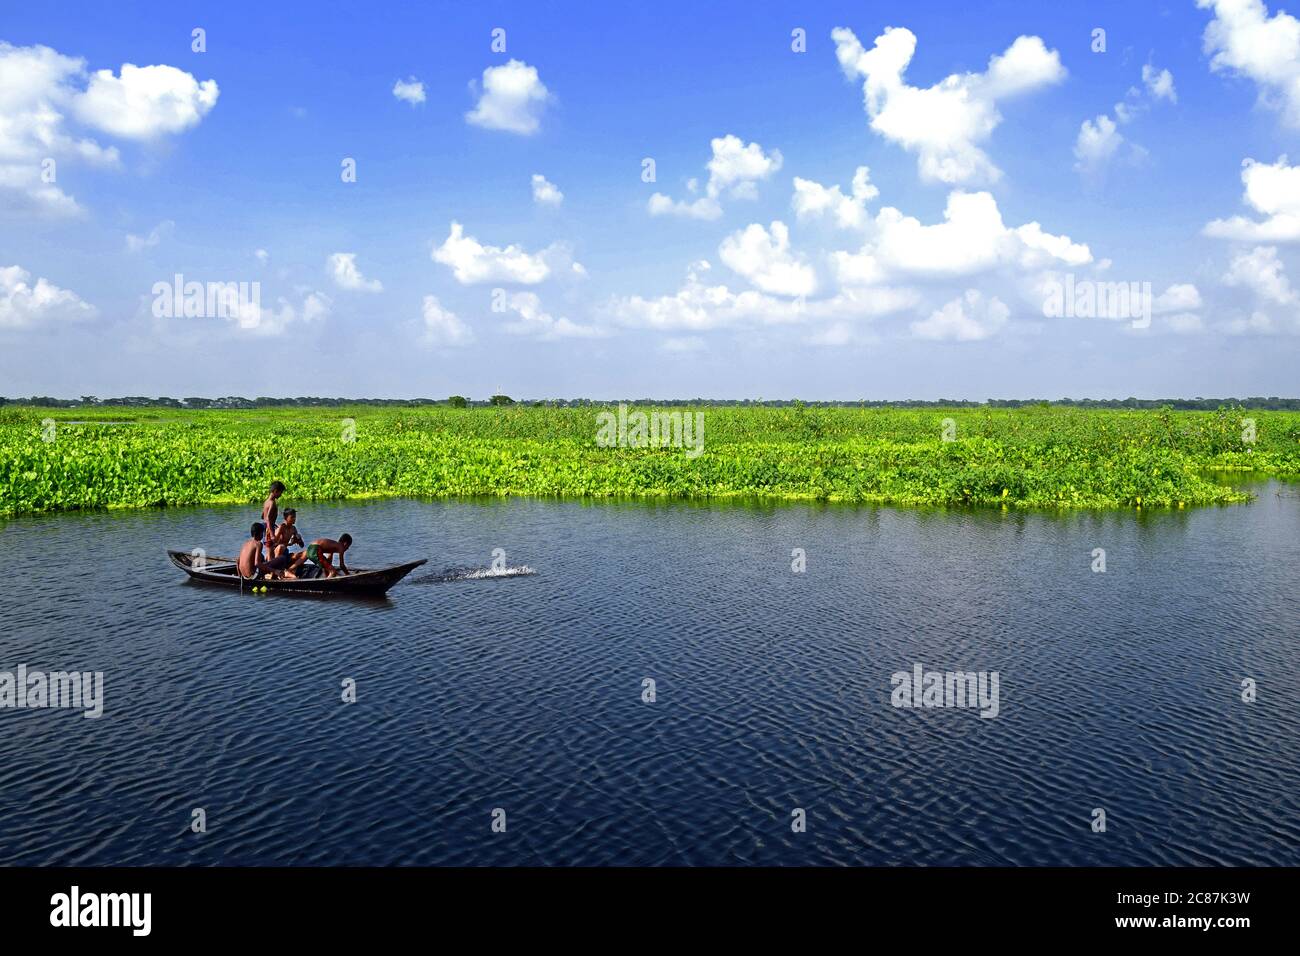 Childrens travel in beautiful pond with a boat Stock Photo